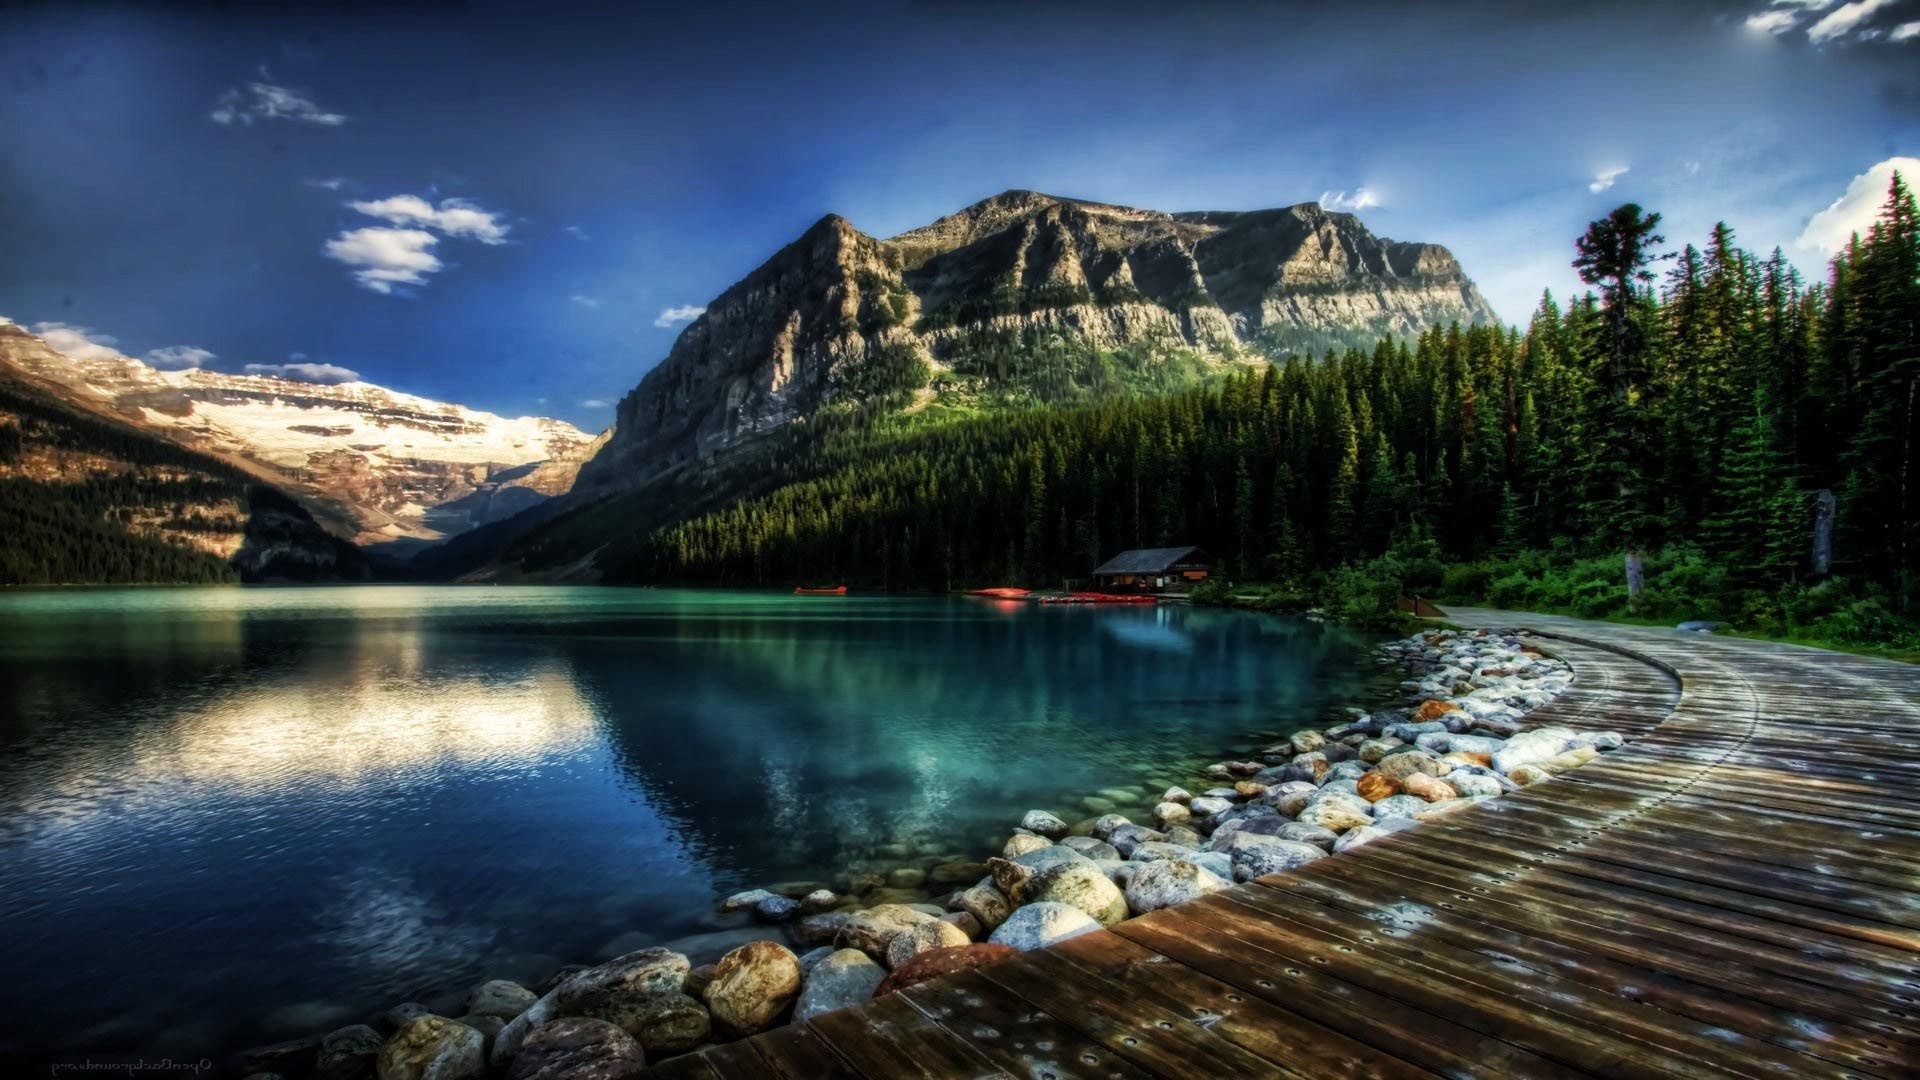 1920x1080 Fly Fishing Wallpapers Desktop Background Inspirational Fantastic Lake  Louise In Alberta Canada Hdr Wallpapers Hd Free